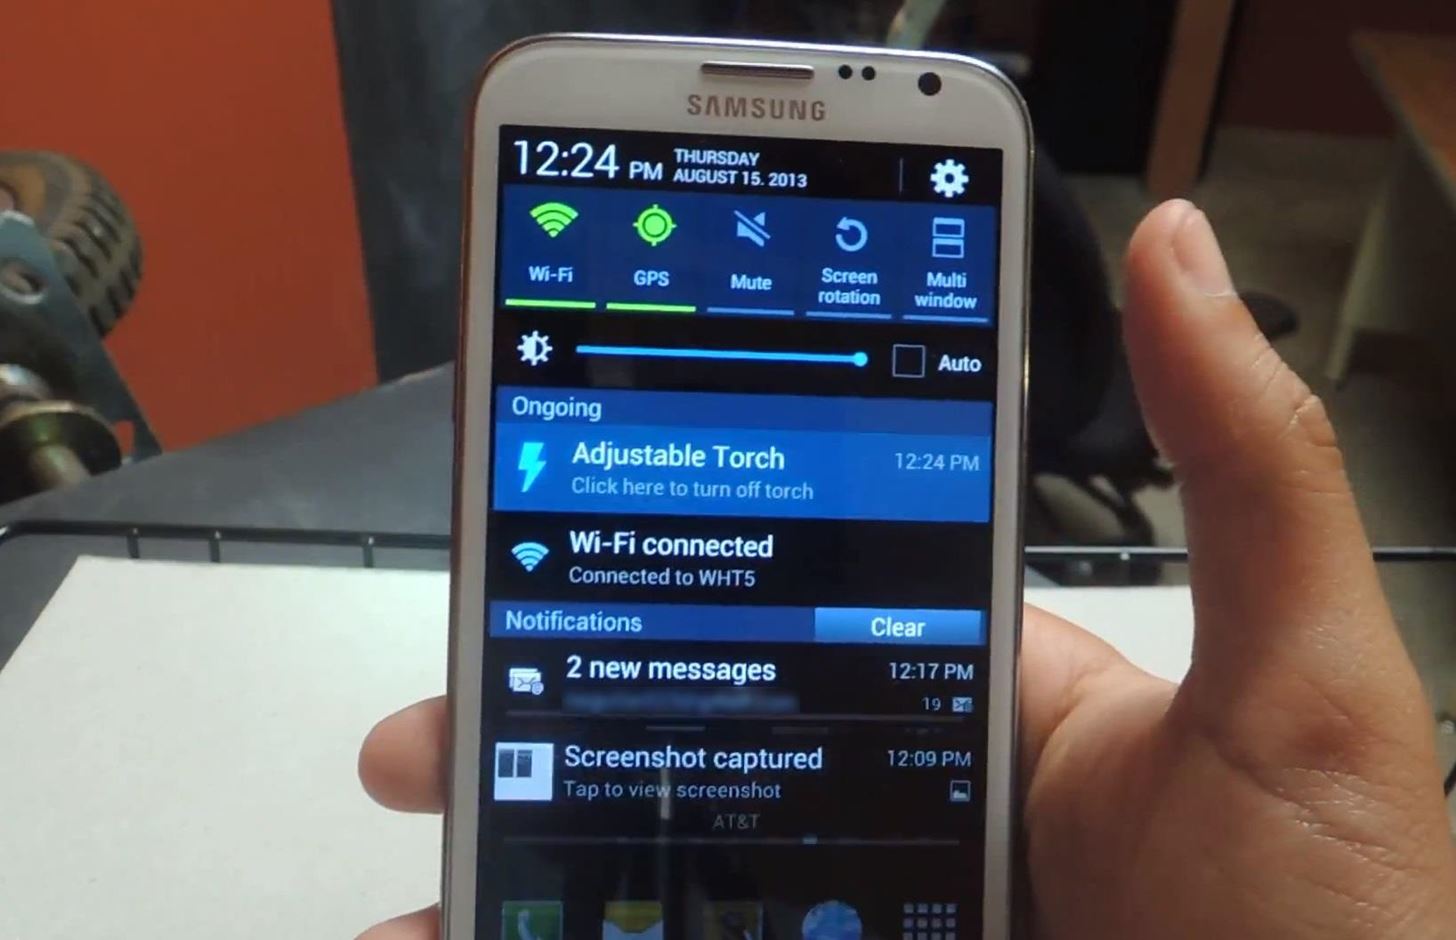 The Flashlight That Finally Lets You Adjust LED Brightness on Your Samsung Galaxy Note 2